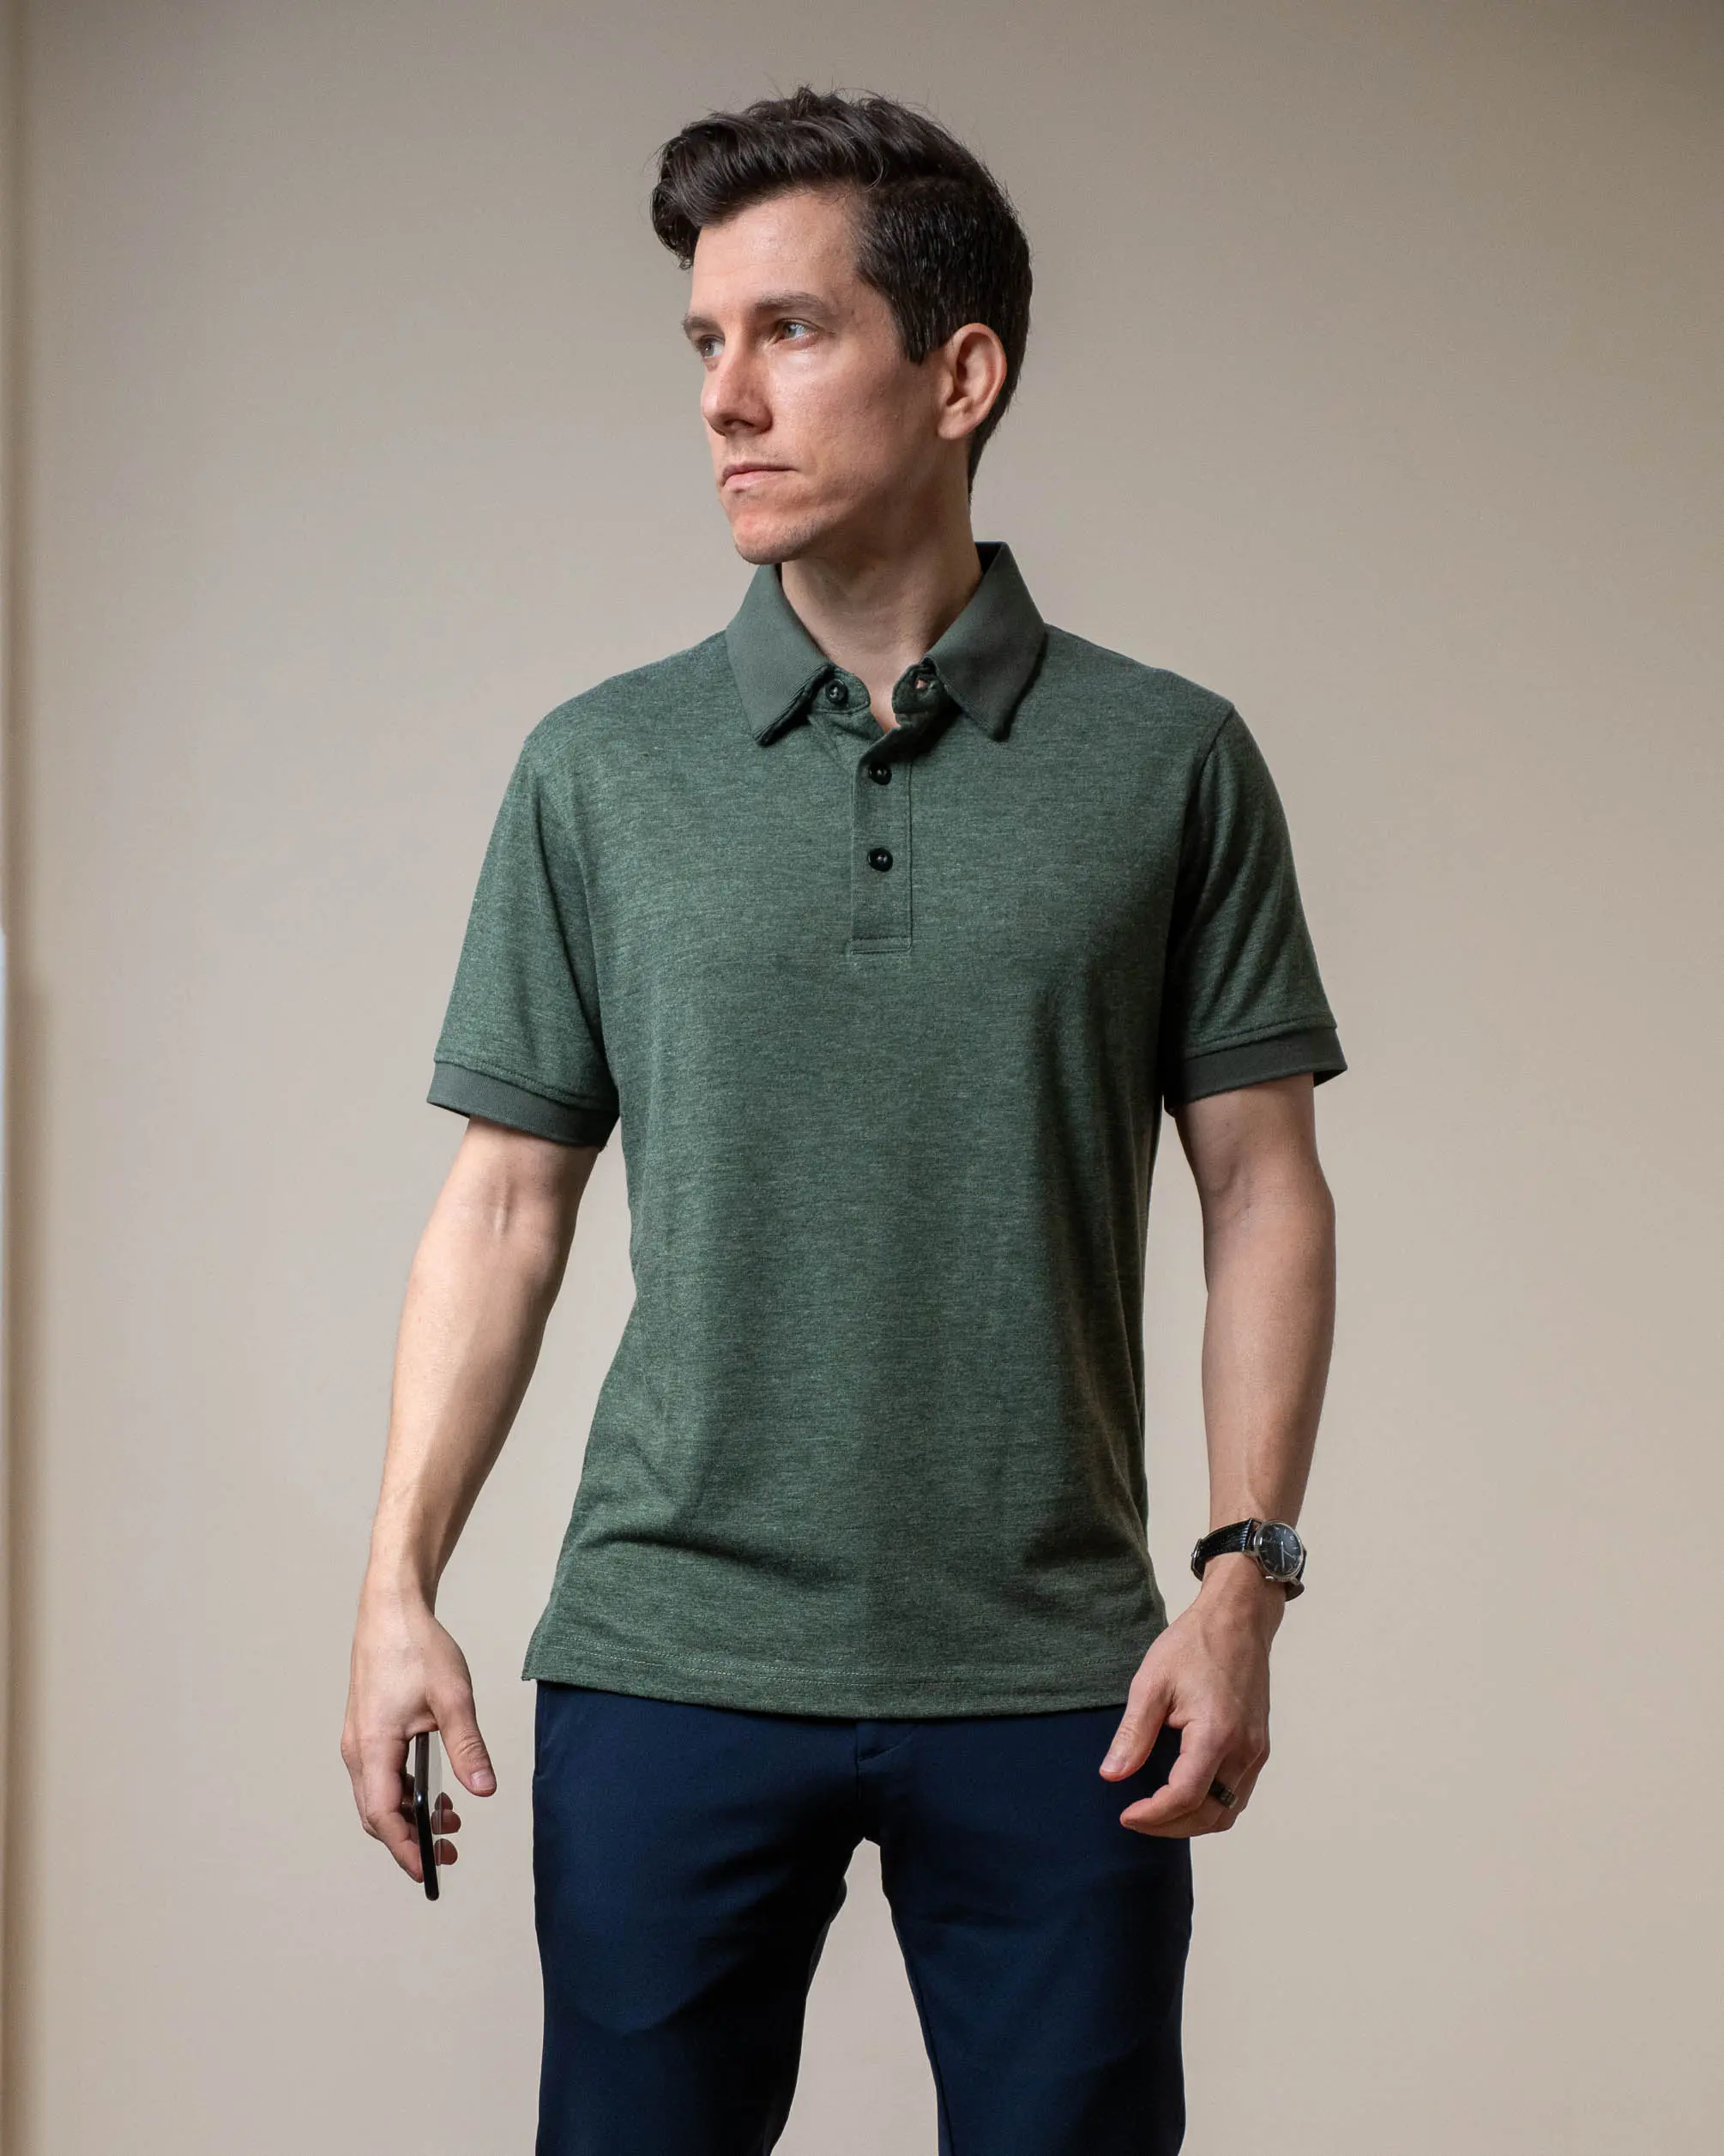 Under 510 polo shirt front